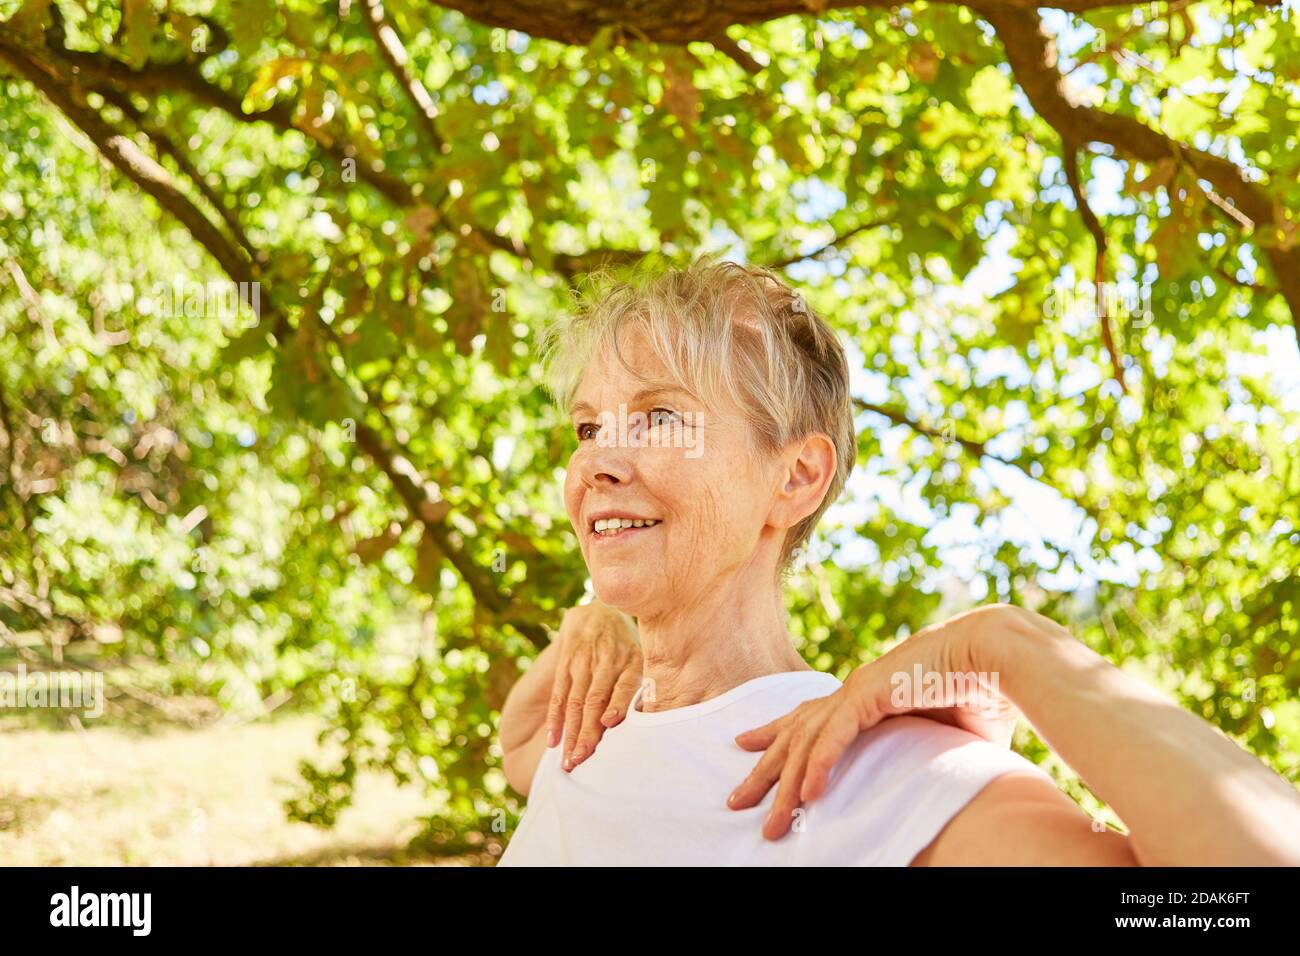 Elderly smiling woman doing a yoga breathing exercise for relaxation and health Stock Photo